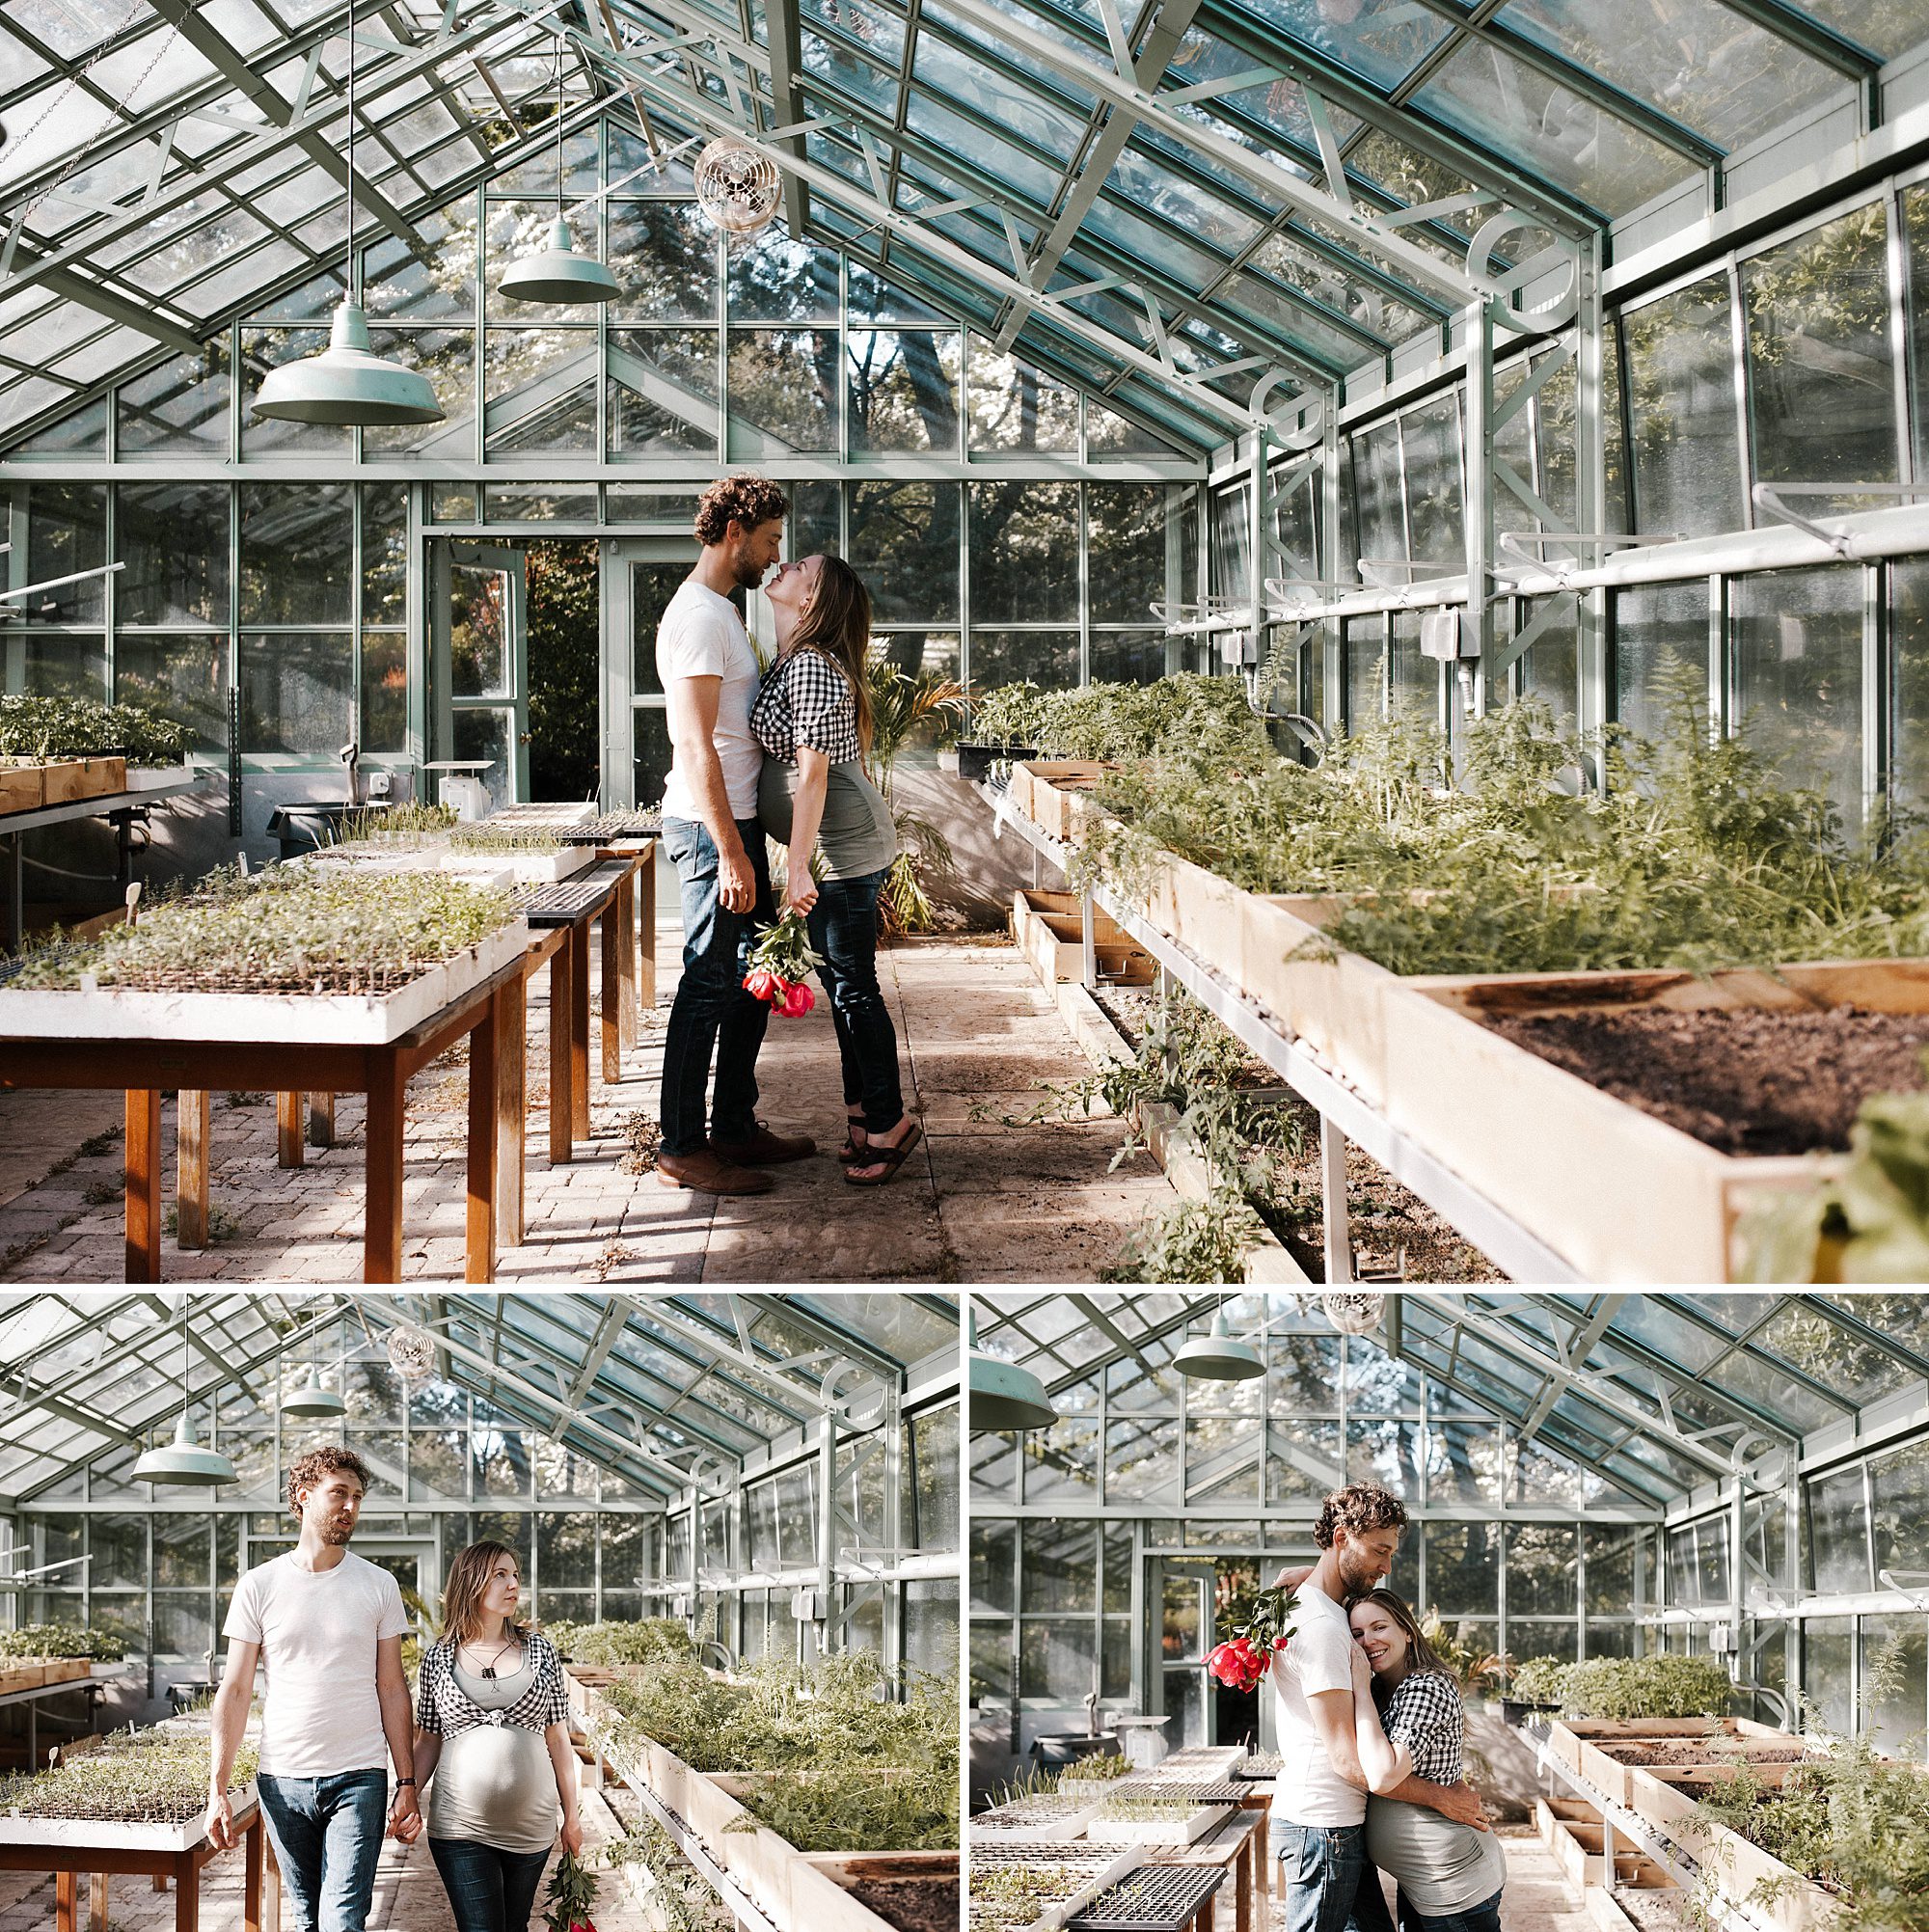 A young couple poses in a beautiful glass greenhouse. By Portland maternity photographer Briana Morrison